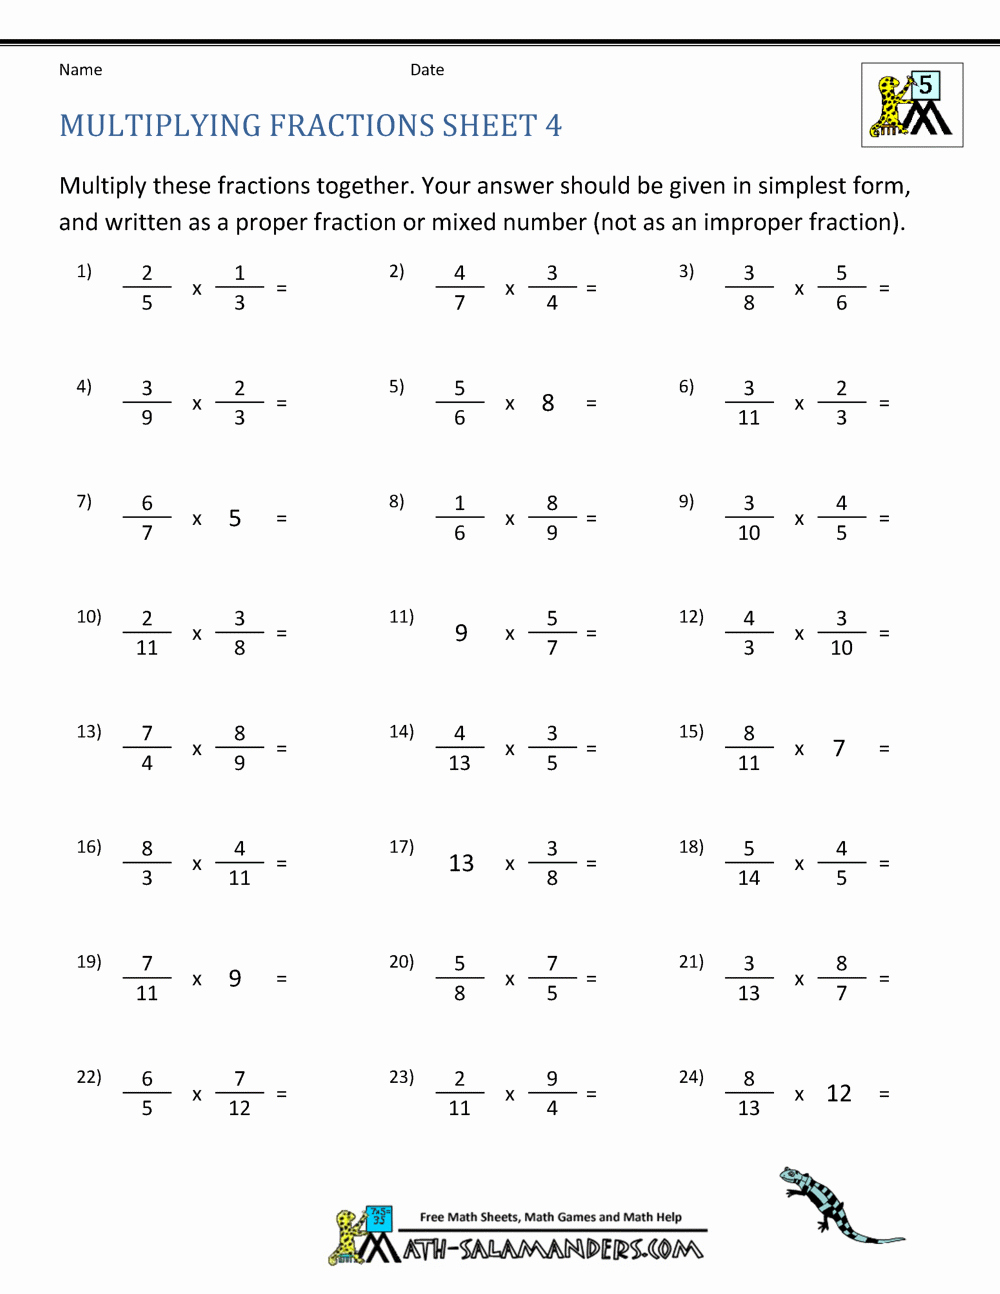 Multiplying Fractions Worksheets with Answers Unique Multiplying Fractions